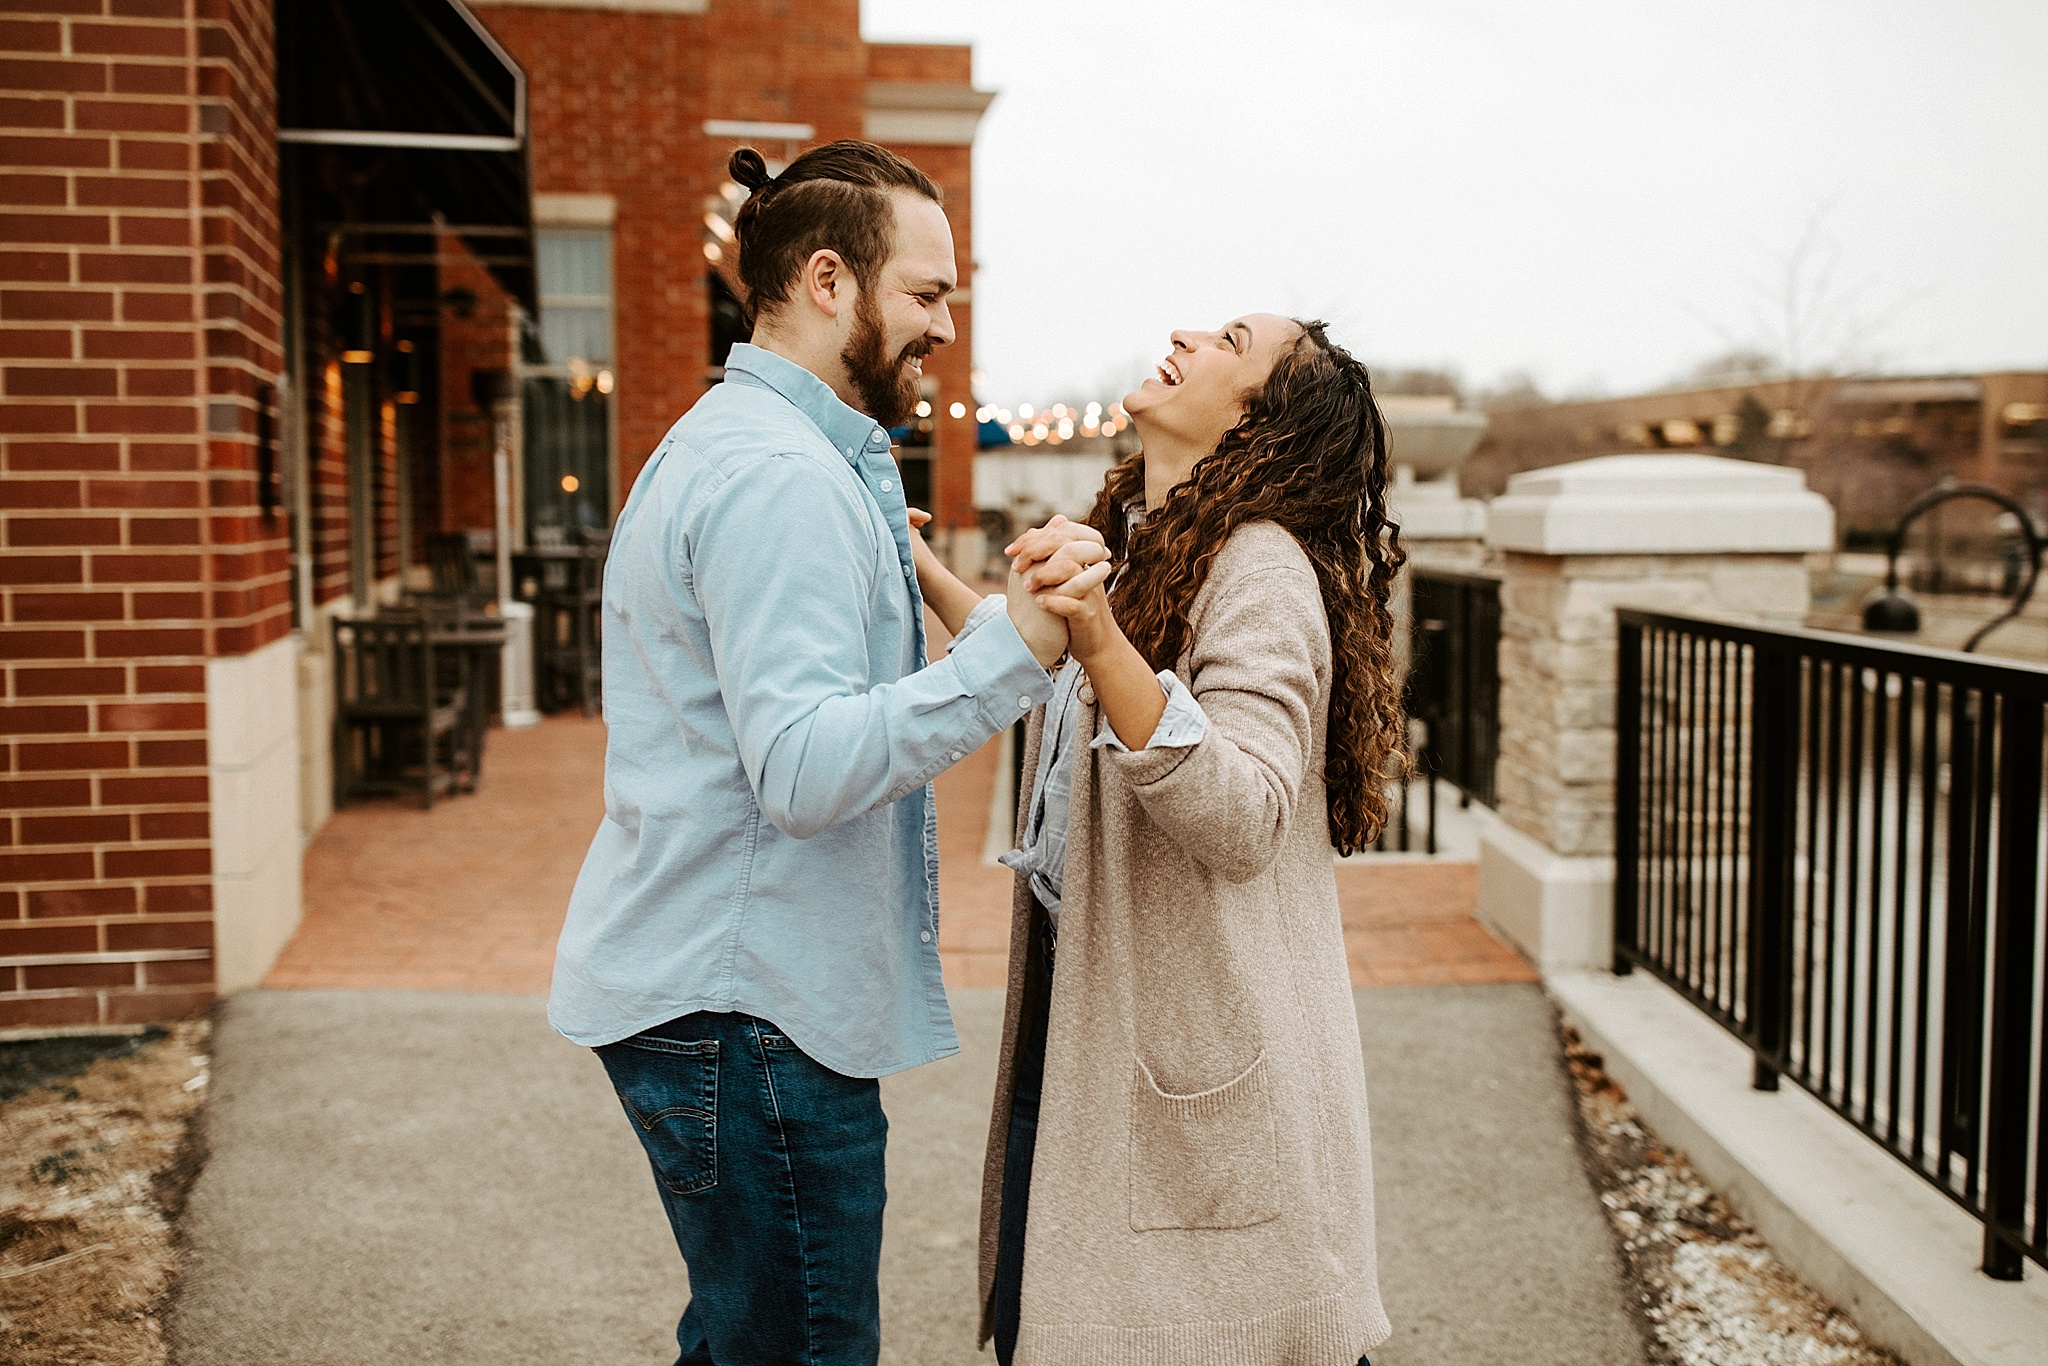 fun couples session along the riverwalk in Naperville, IL. Krystal Richmond Photography